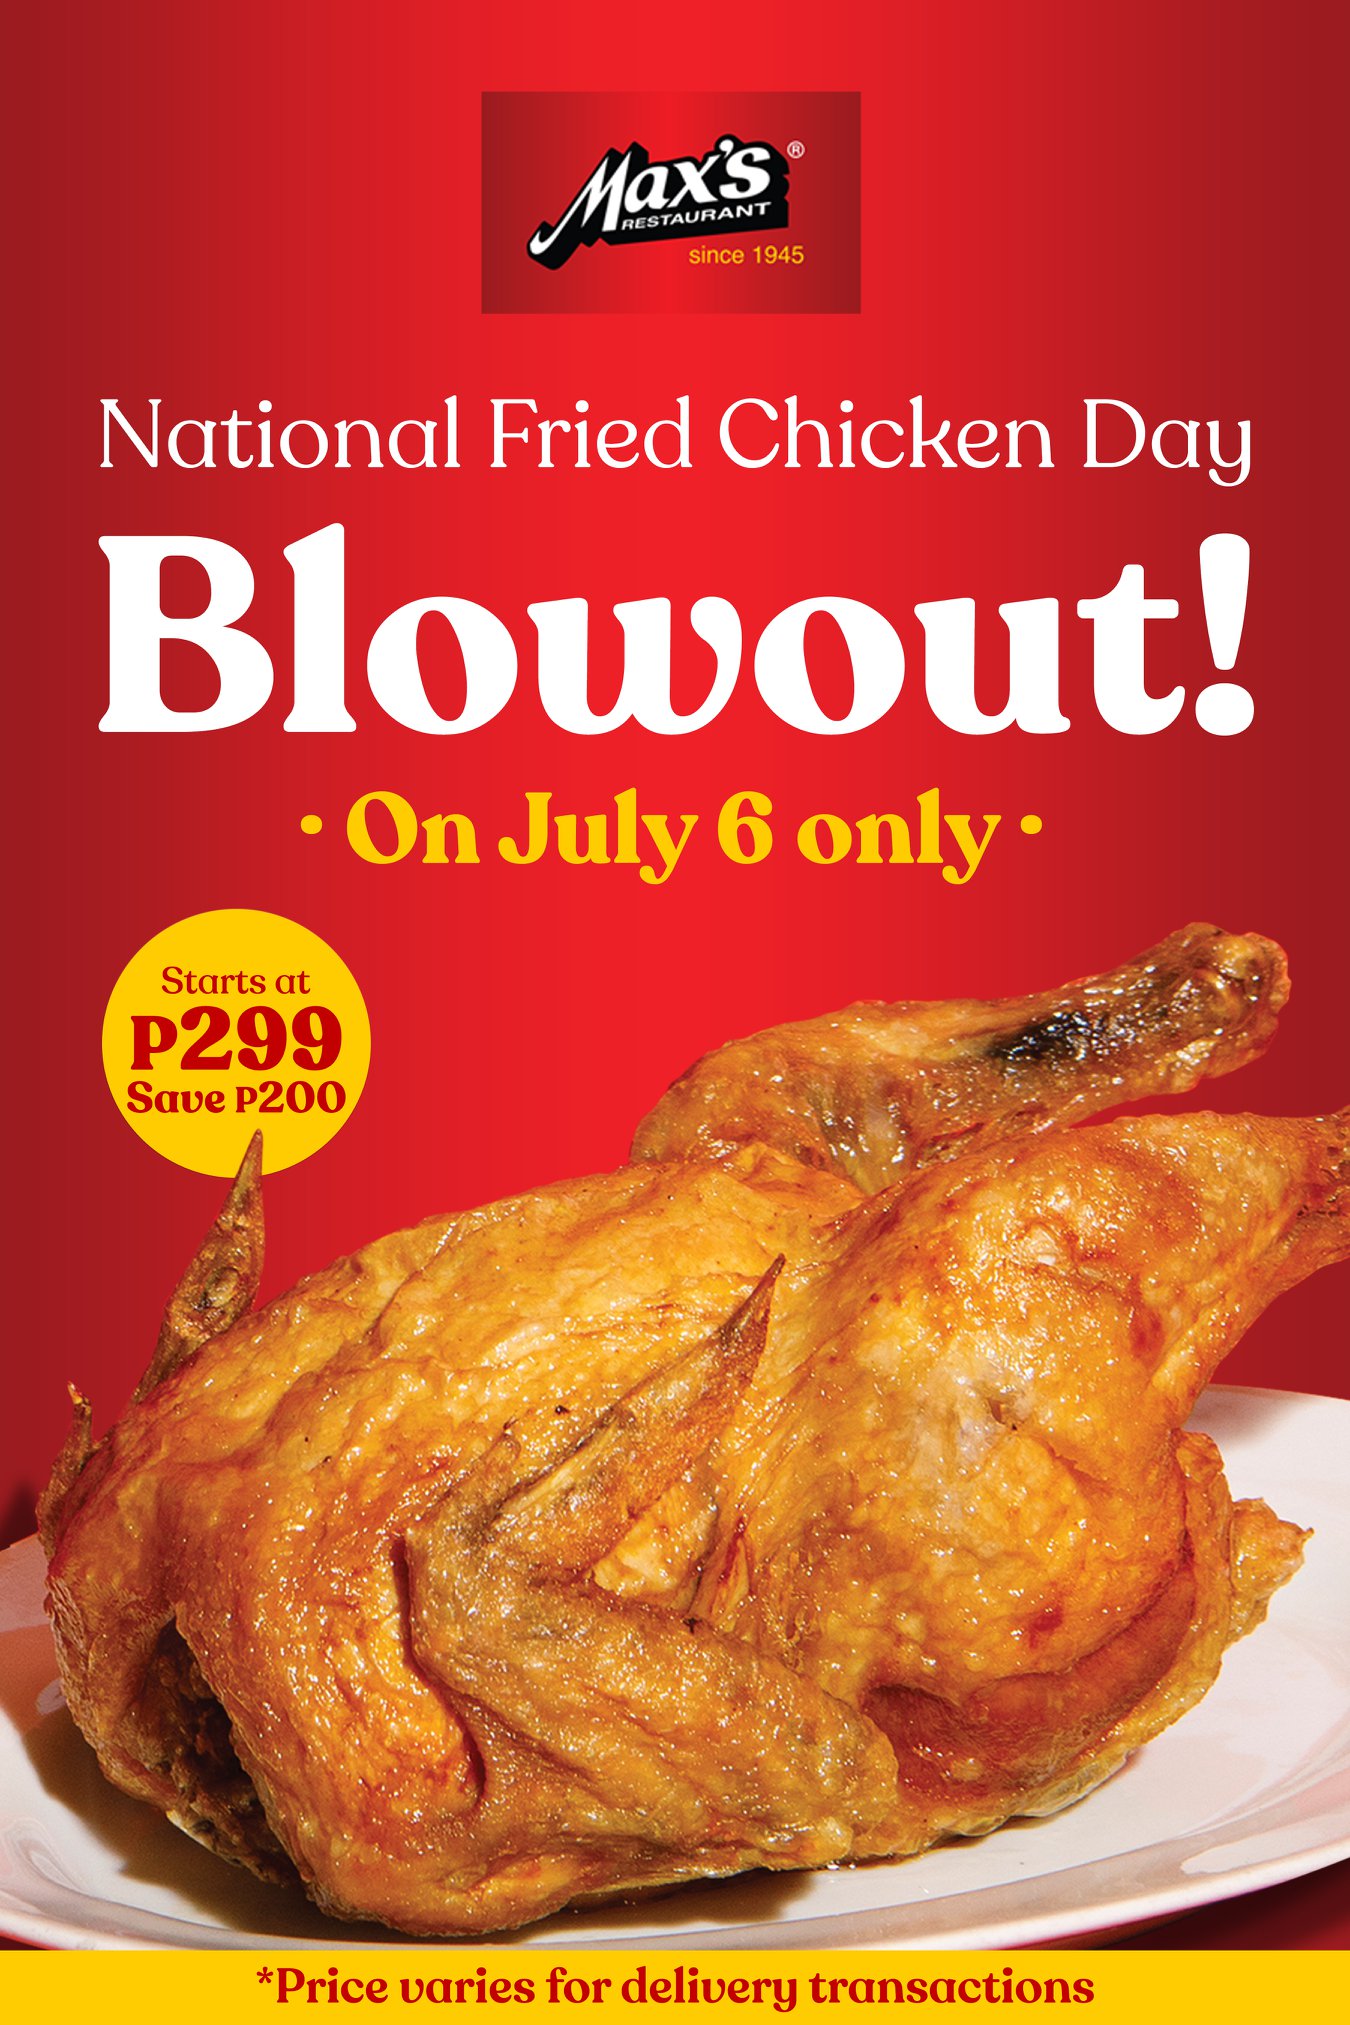 Max's National Fried Chicken Day Blowout